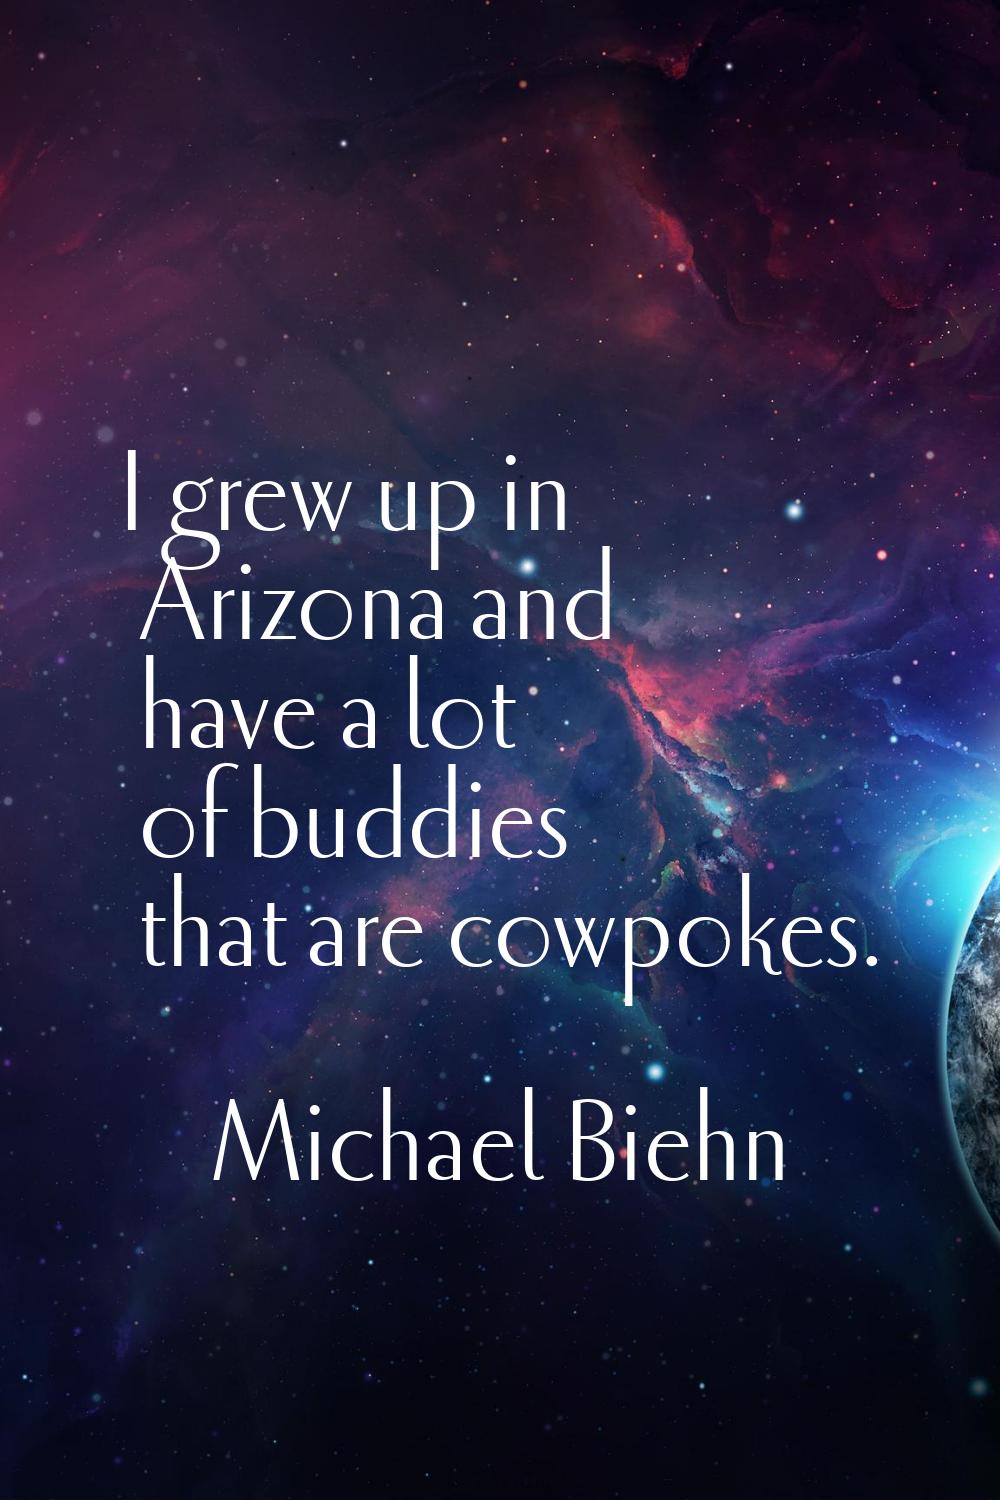 I grew up in Arizona and have a lot of buddies that are cowpokes.